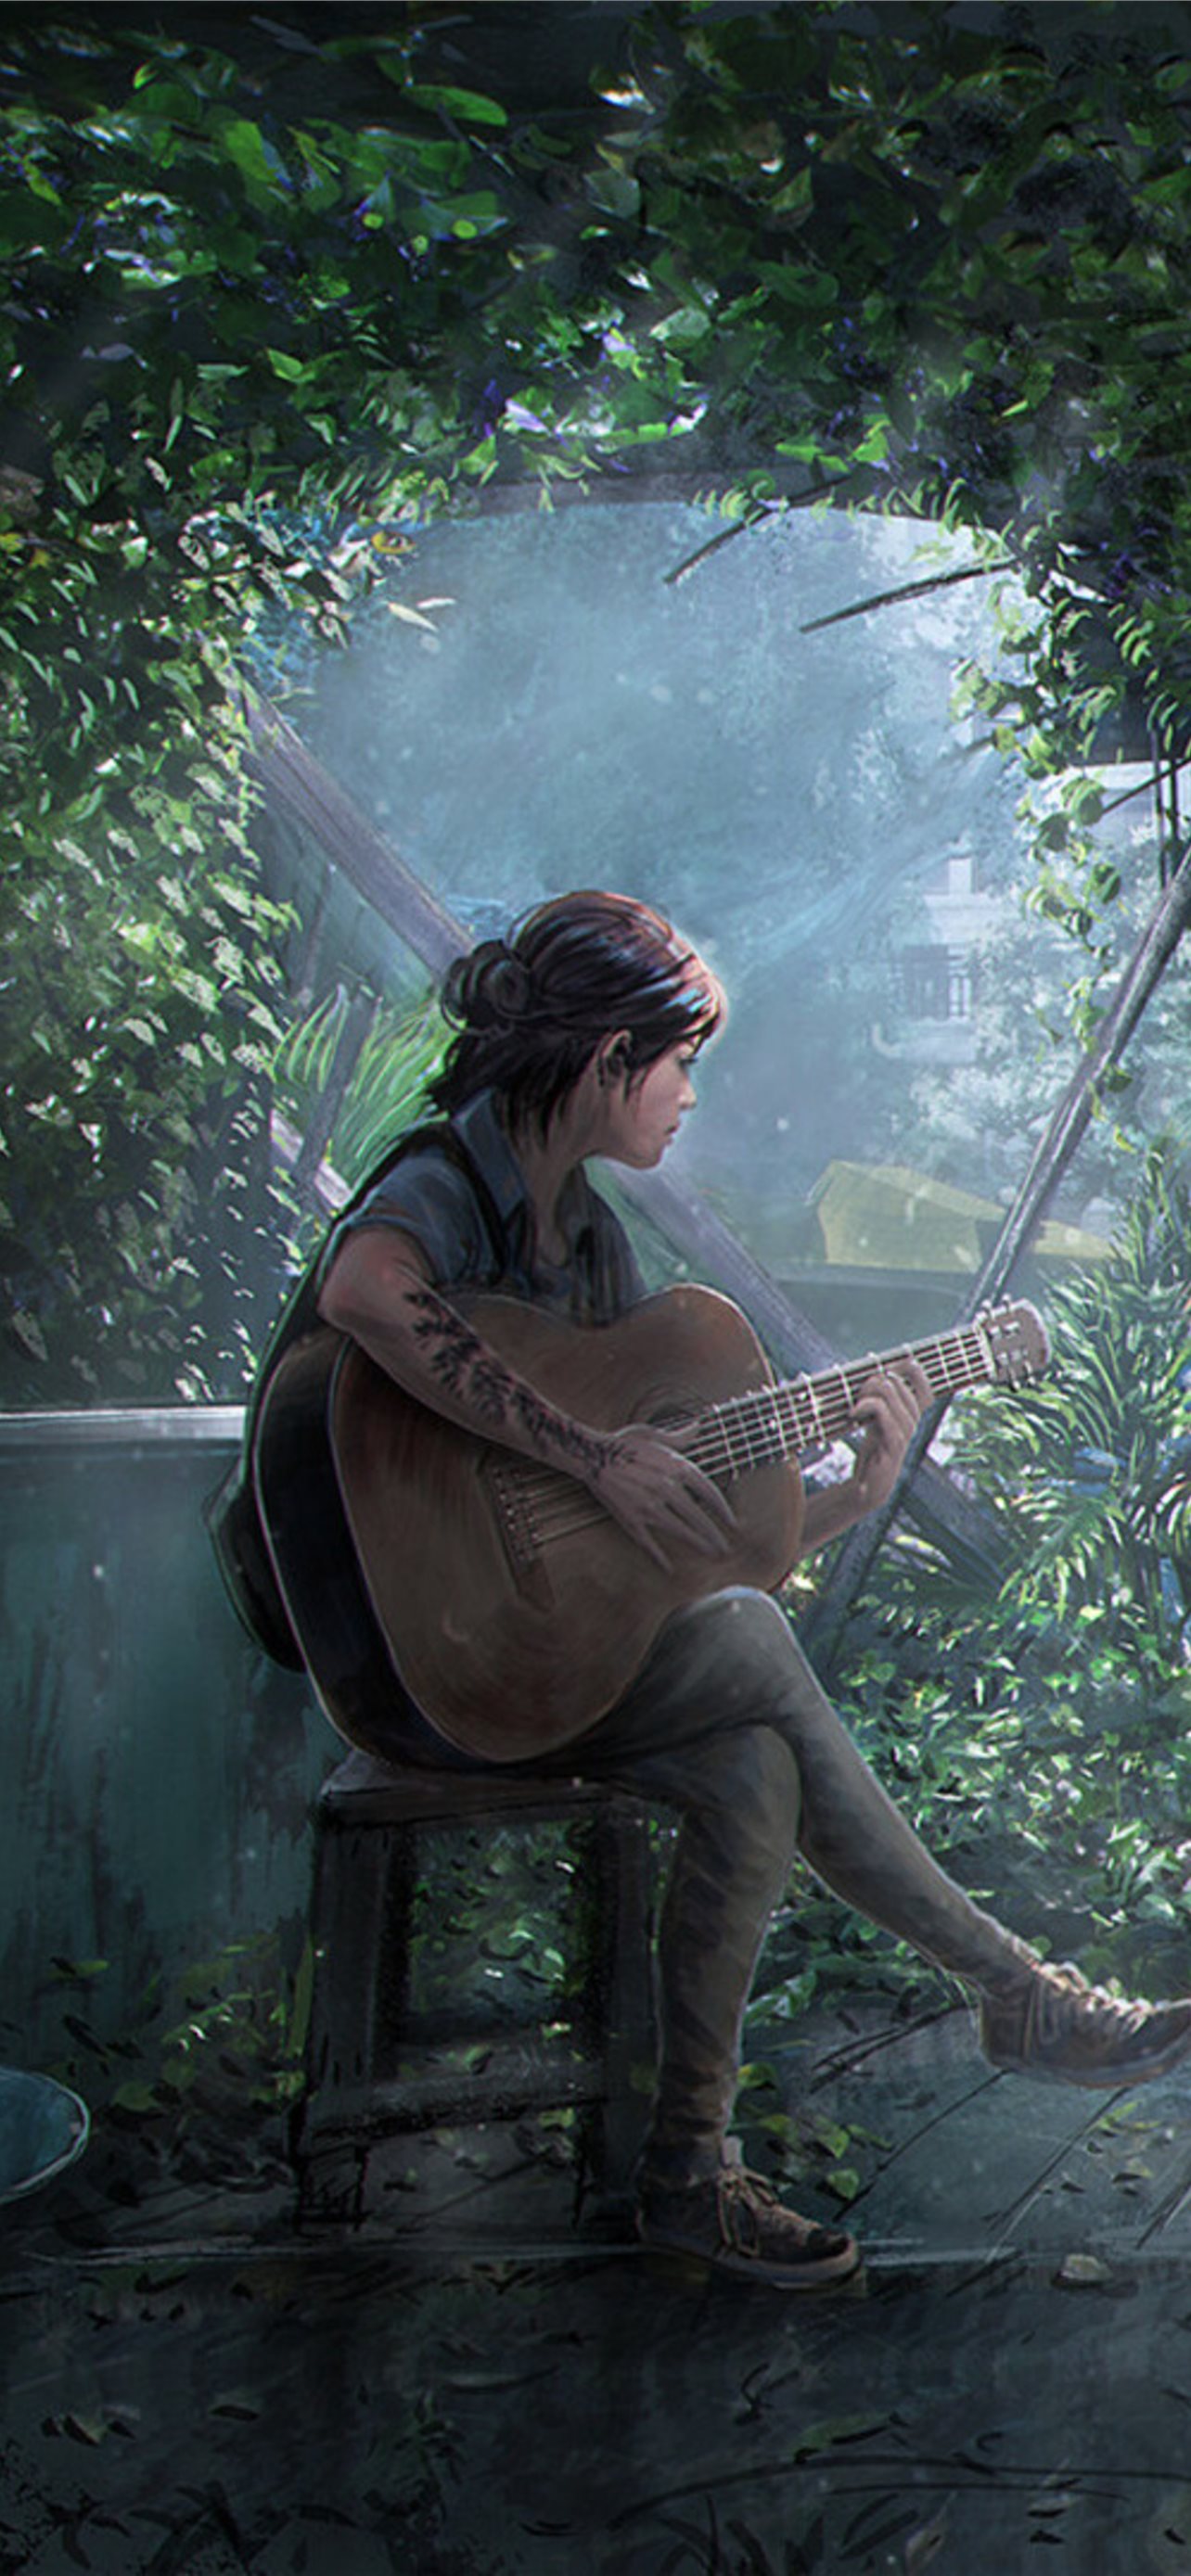 The Last of Us 2 Wallpapers - Top Free The Last of Us 2